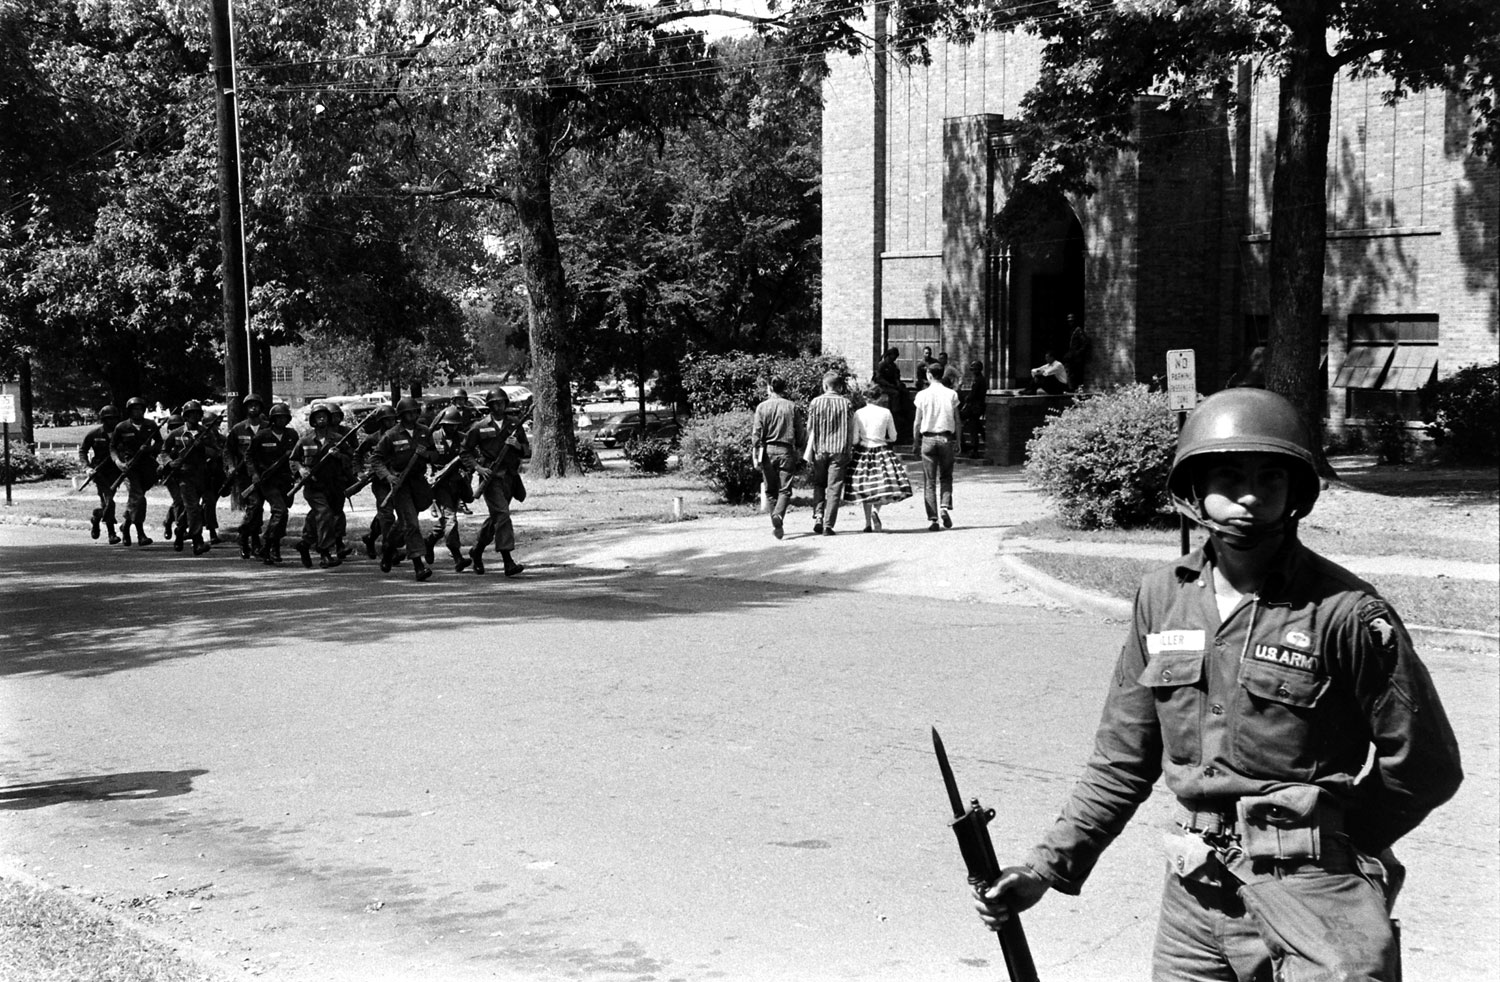 Troops from the 101st Airborne patrol the streets of Little Rock, Arkansas, 1957.